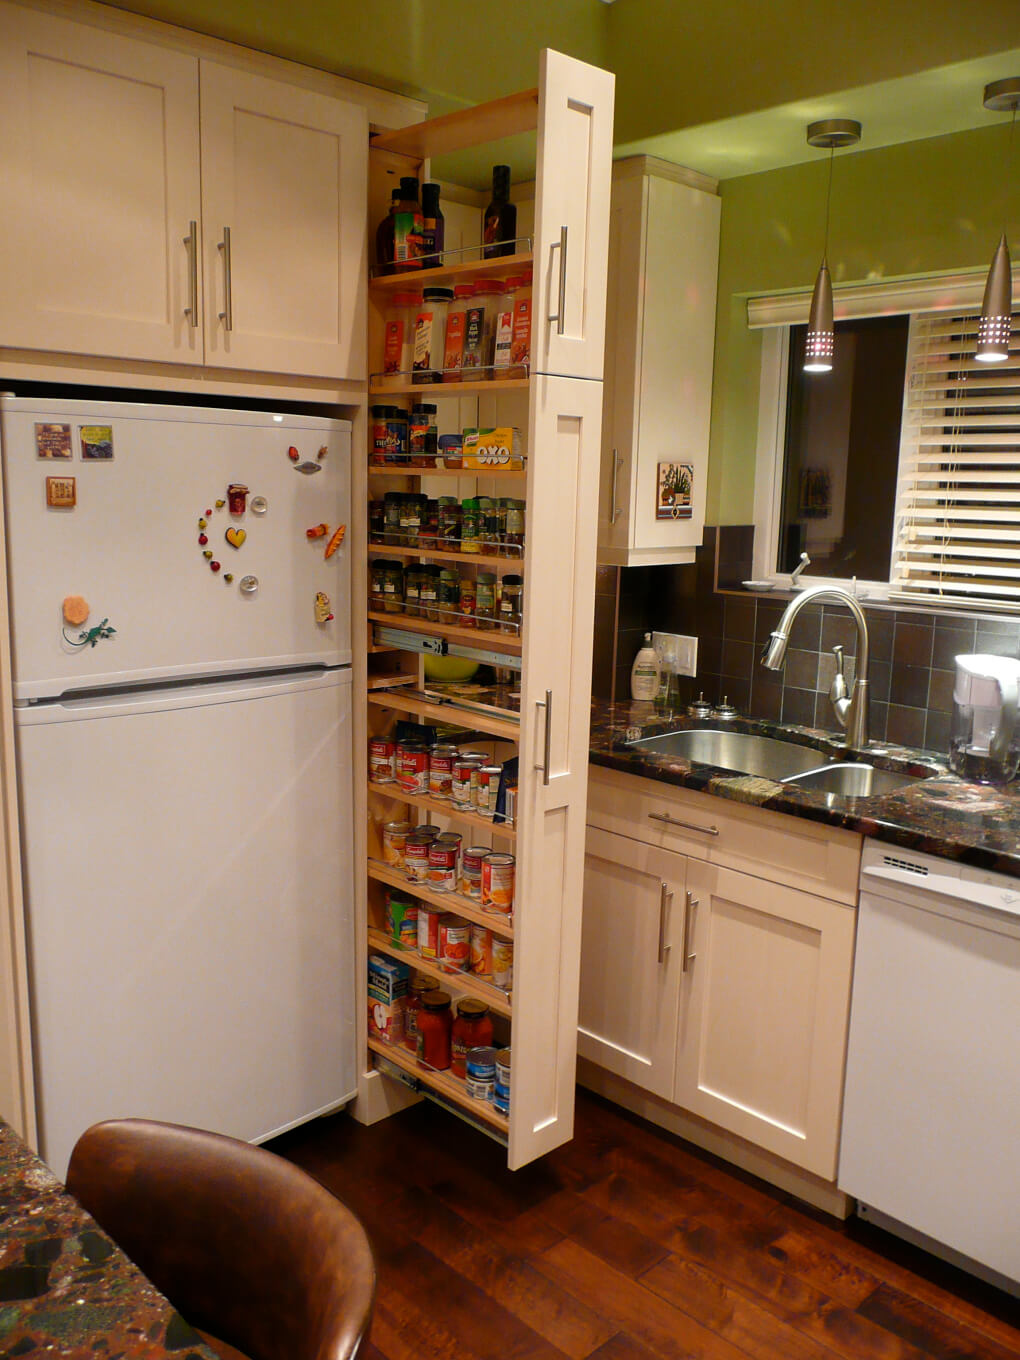 The narrow cabinet beside the fridge pulls out to reveal a spice & canned goods pantry